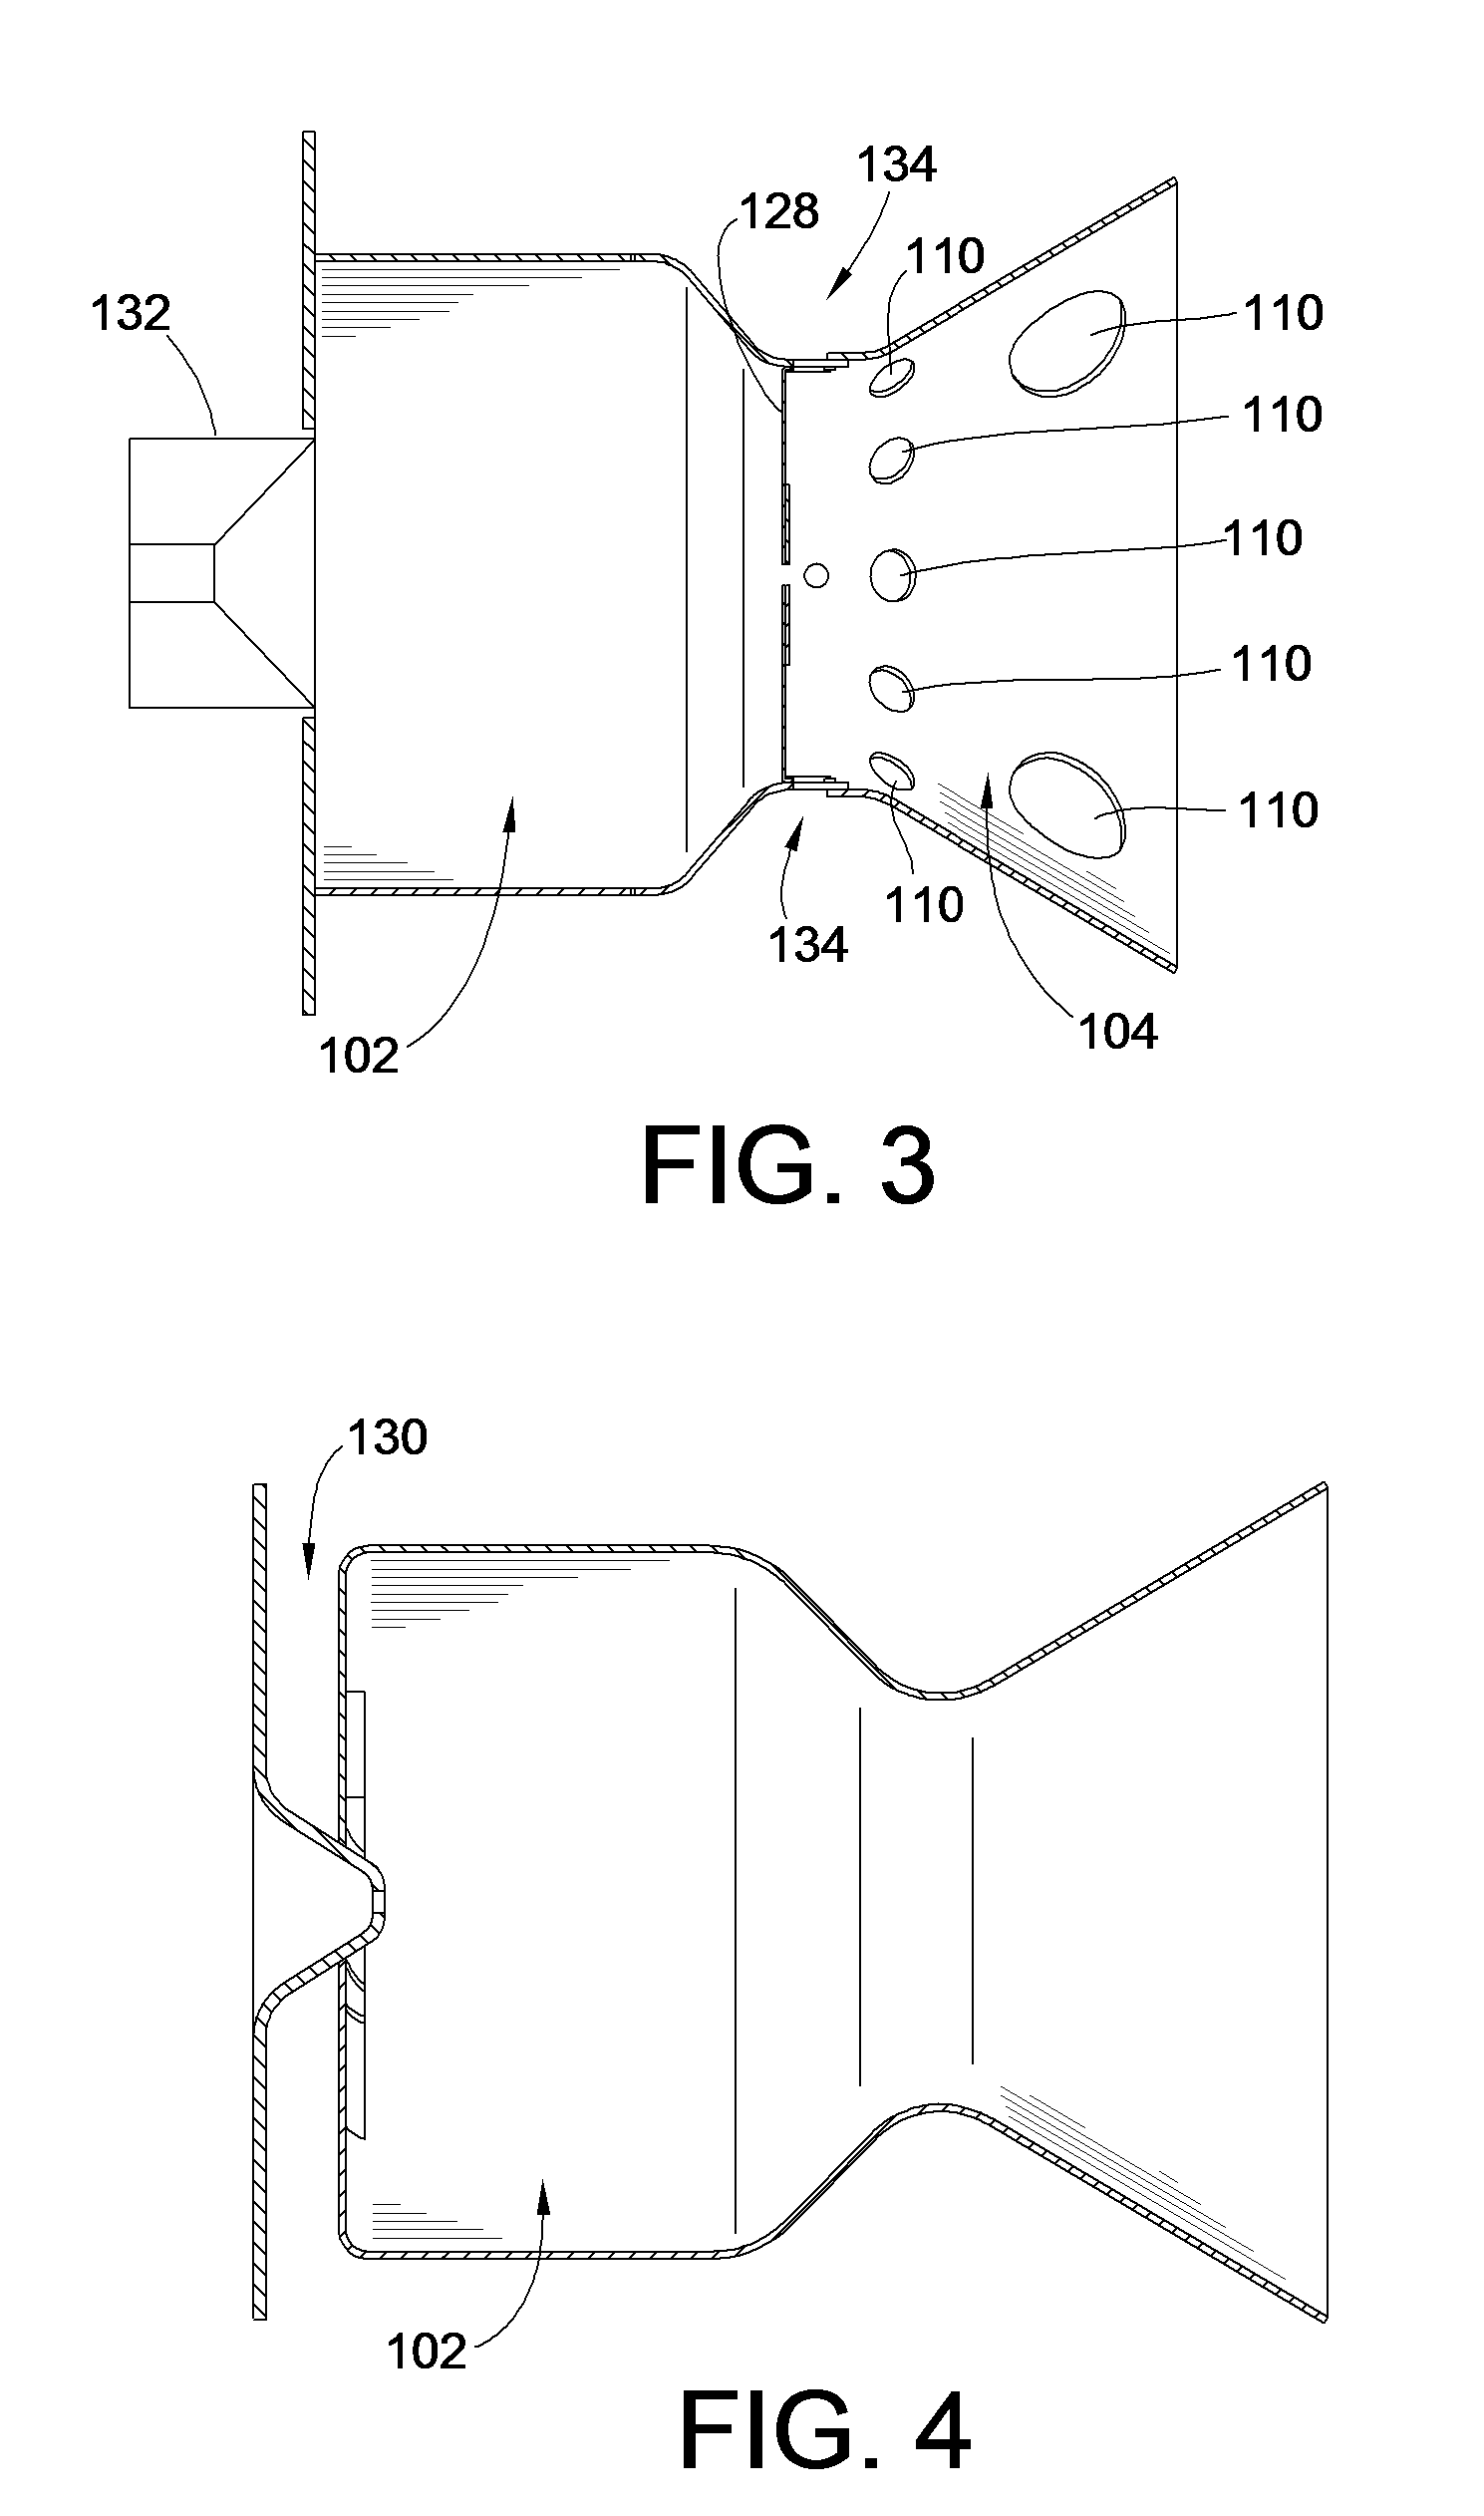 Low pressure drop mixer for radial mixing of internal combustion engine exhaust flows, combustor incorporating same, and methods of mixing